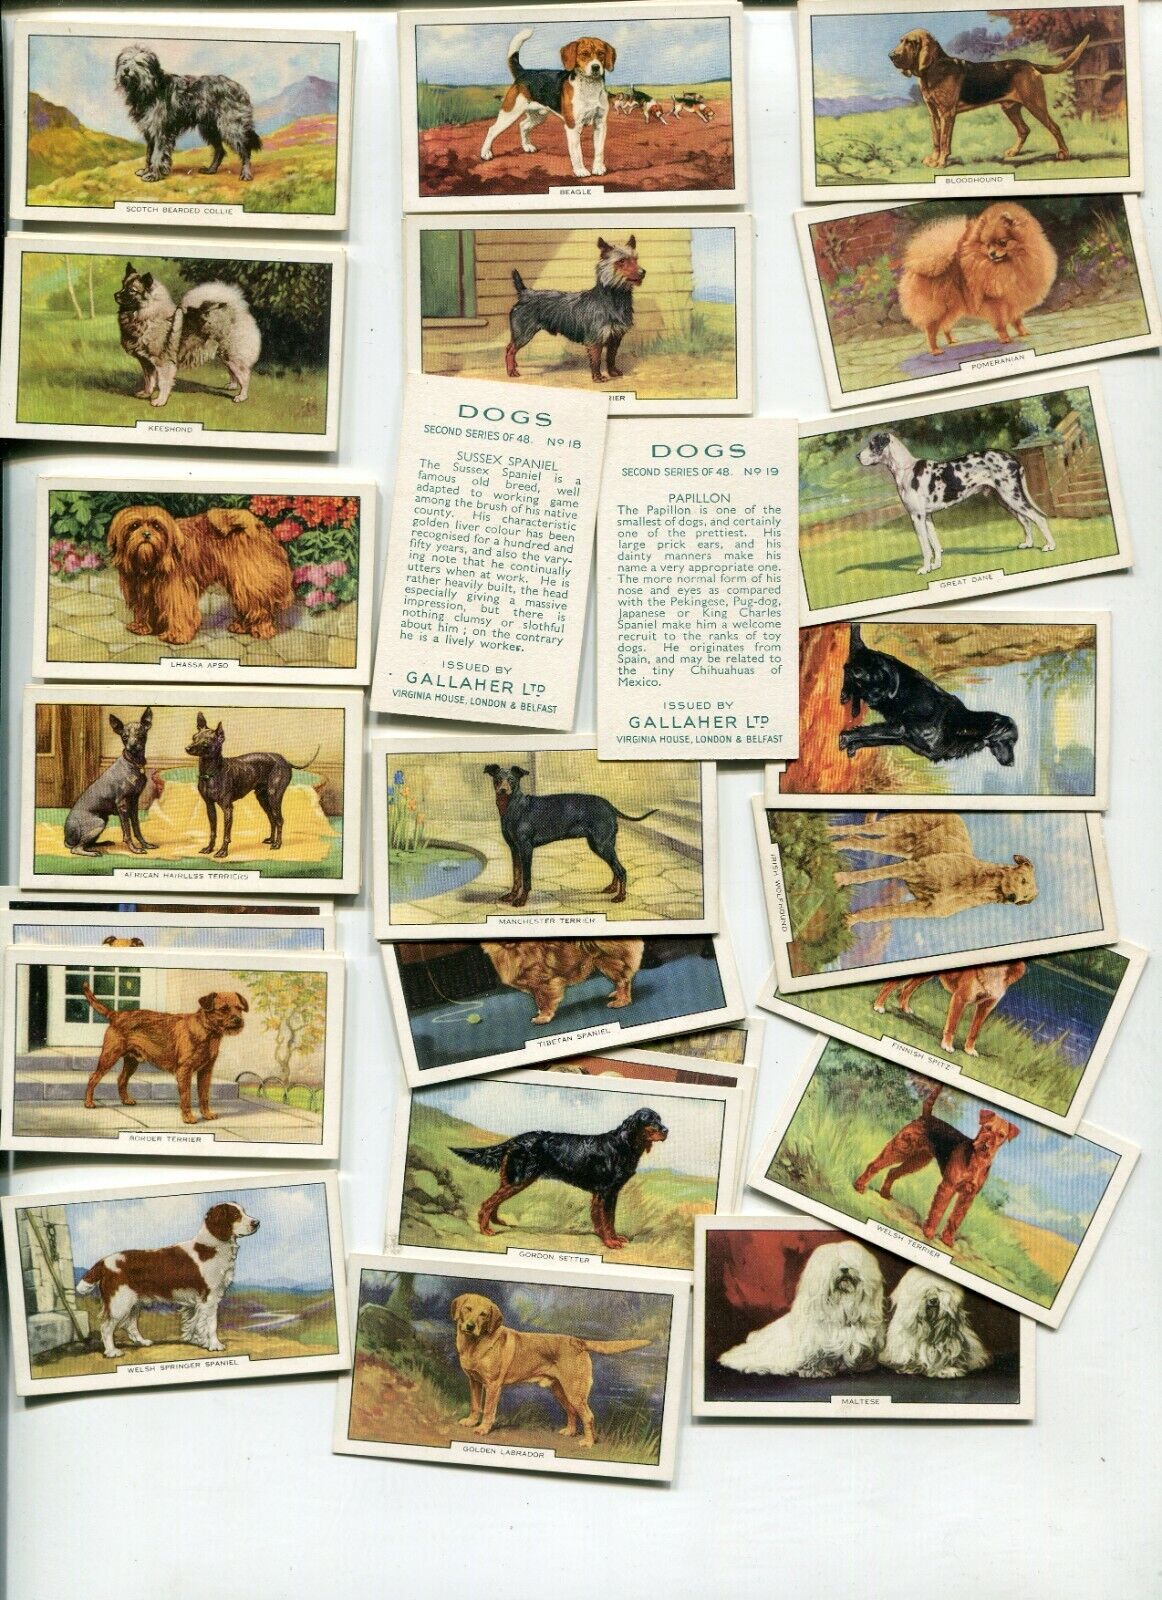 1938 GALLAHER LTD CIGARETTES 48 DIFFERENT DOGS SERIES 2 CARD SET